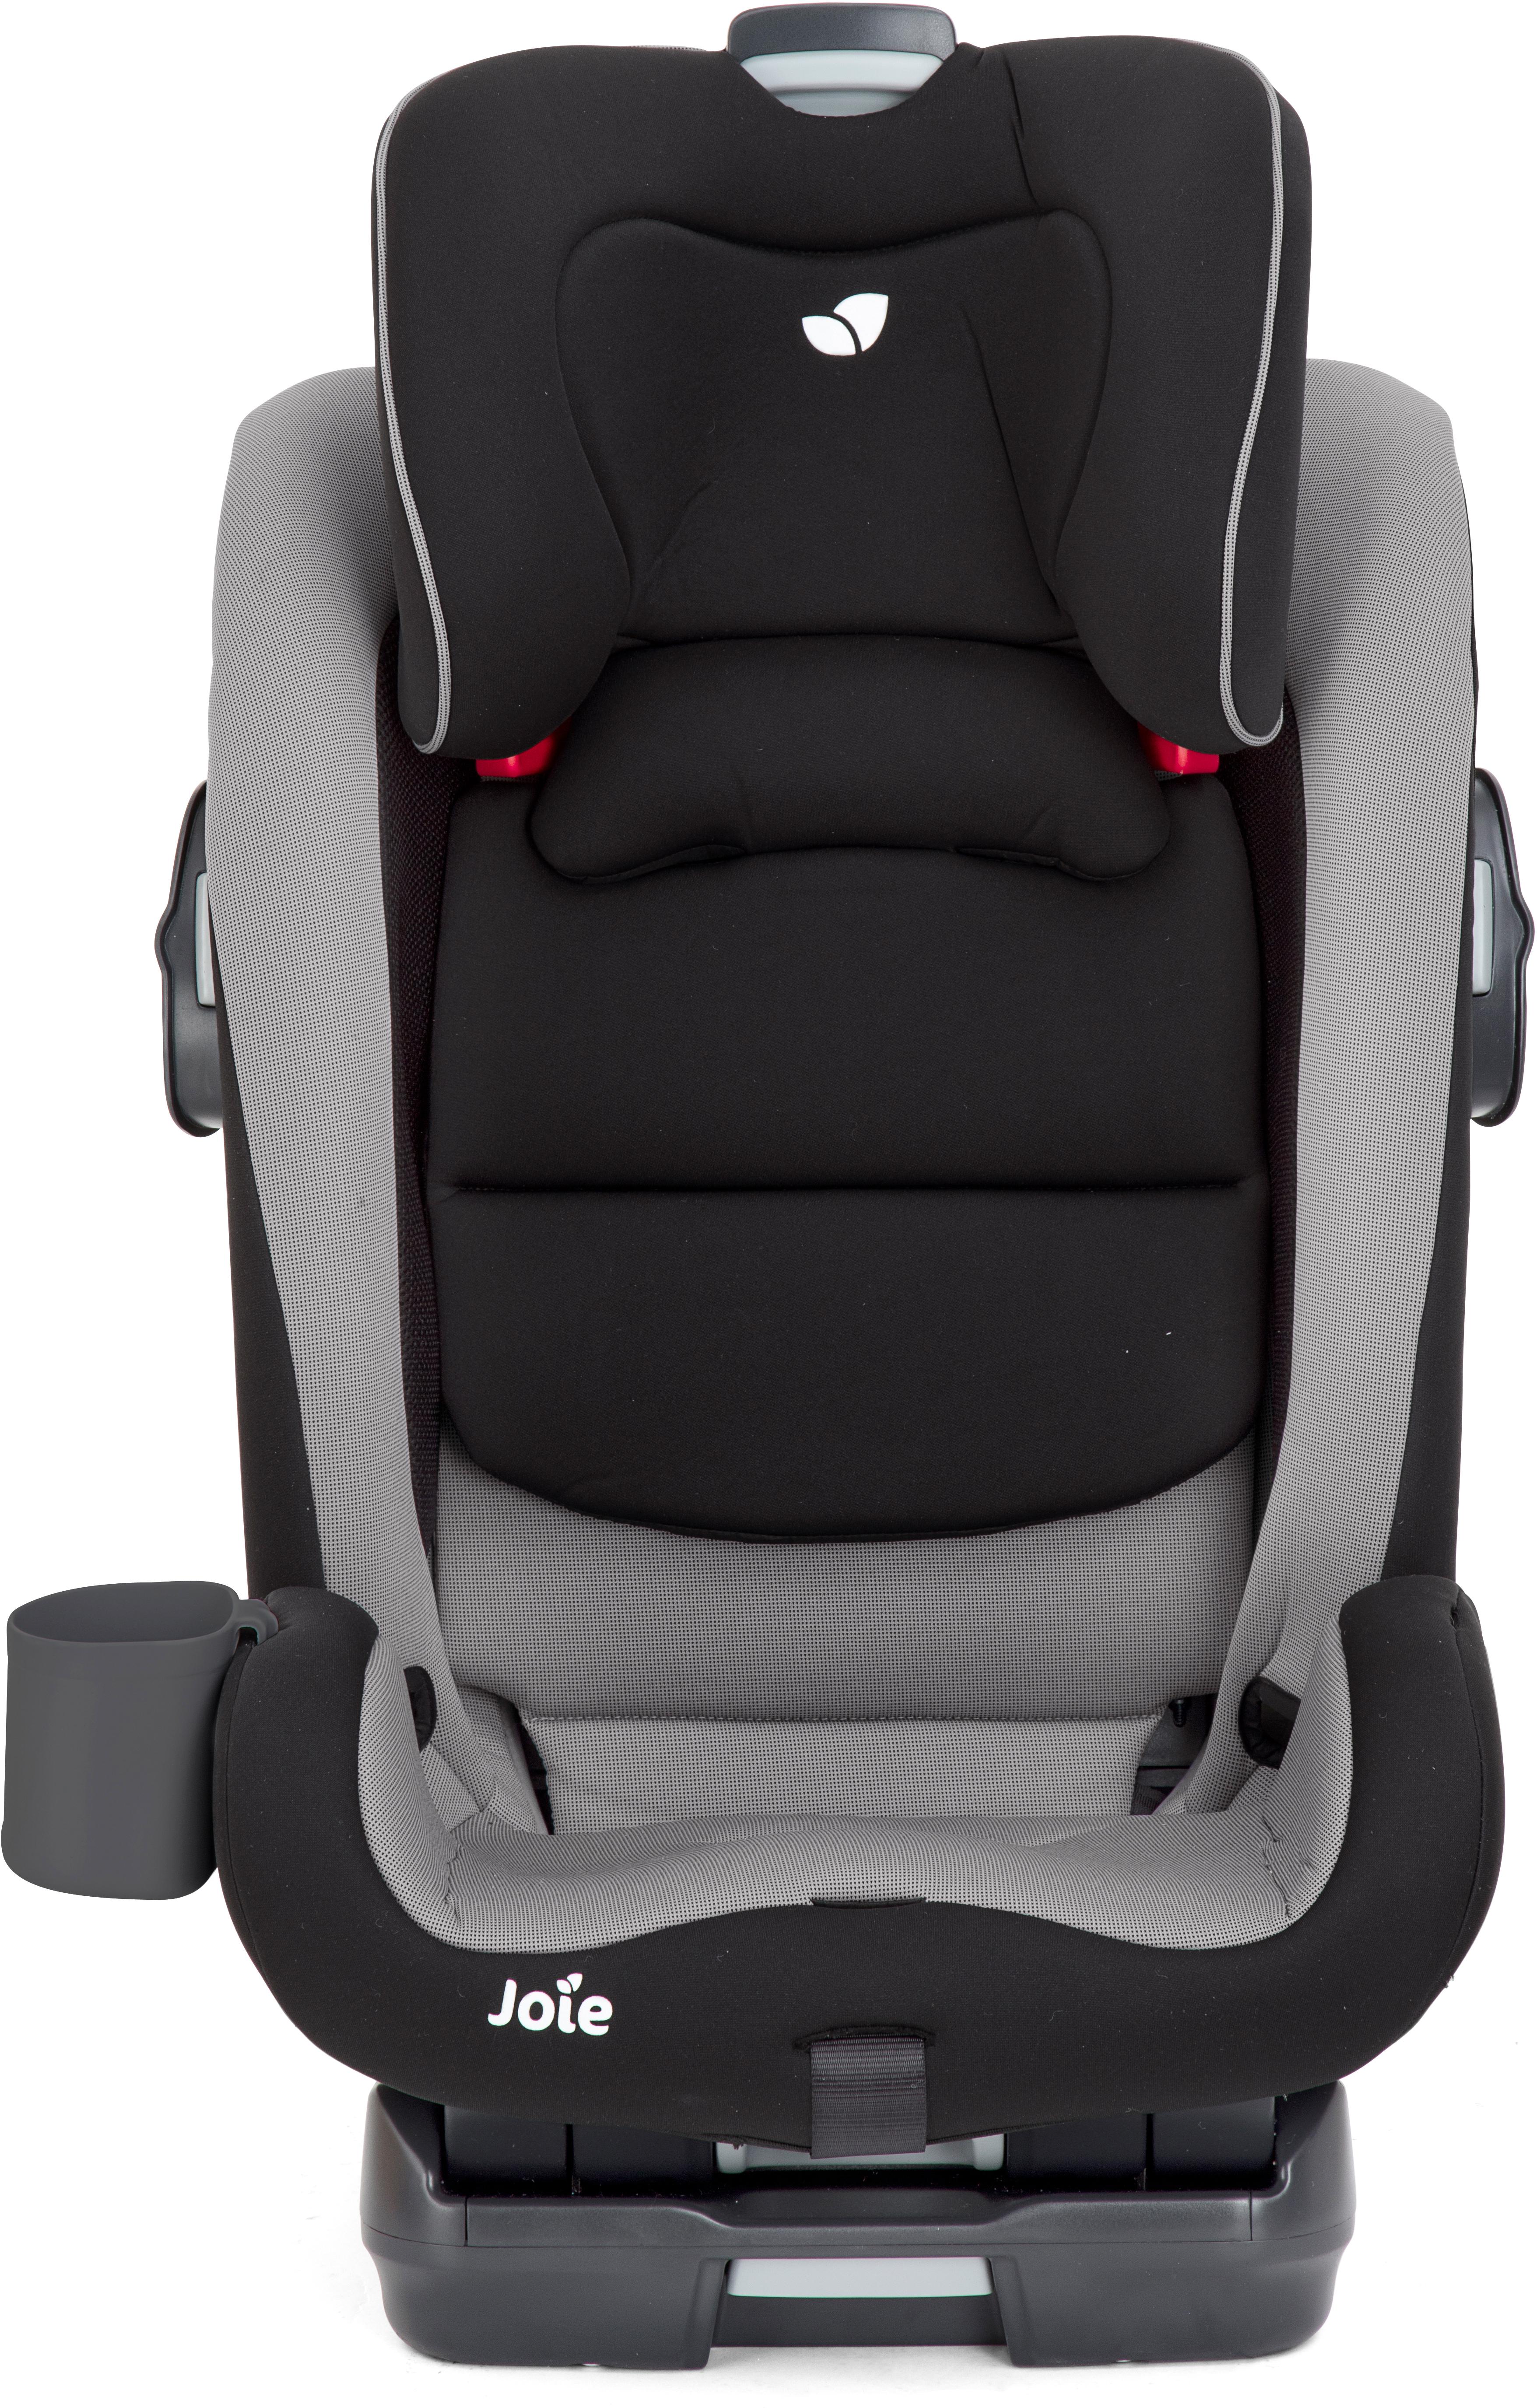 Joie Bold Group 1/2/3 Car Seat - Slate : Next Day Delivery